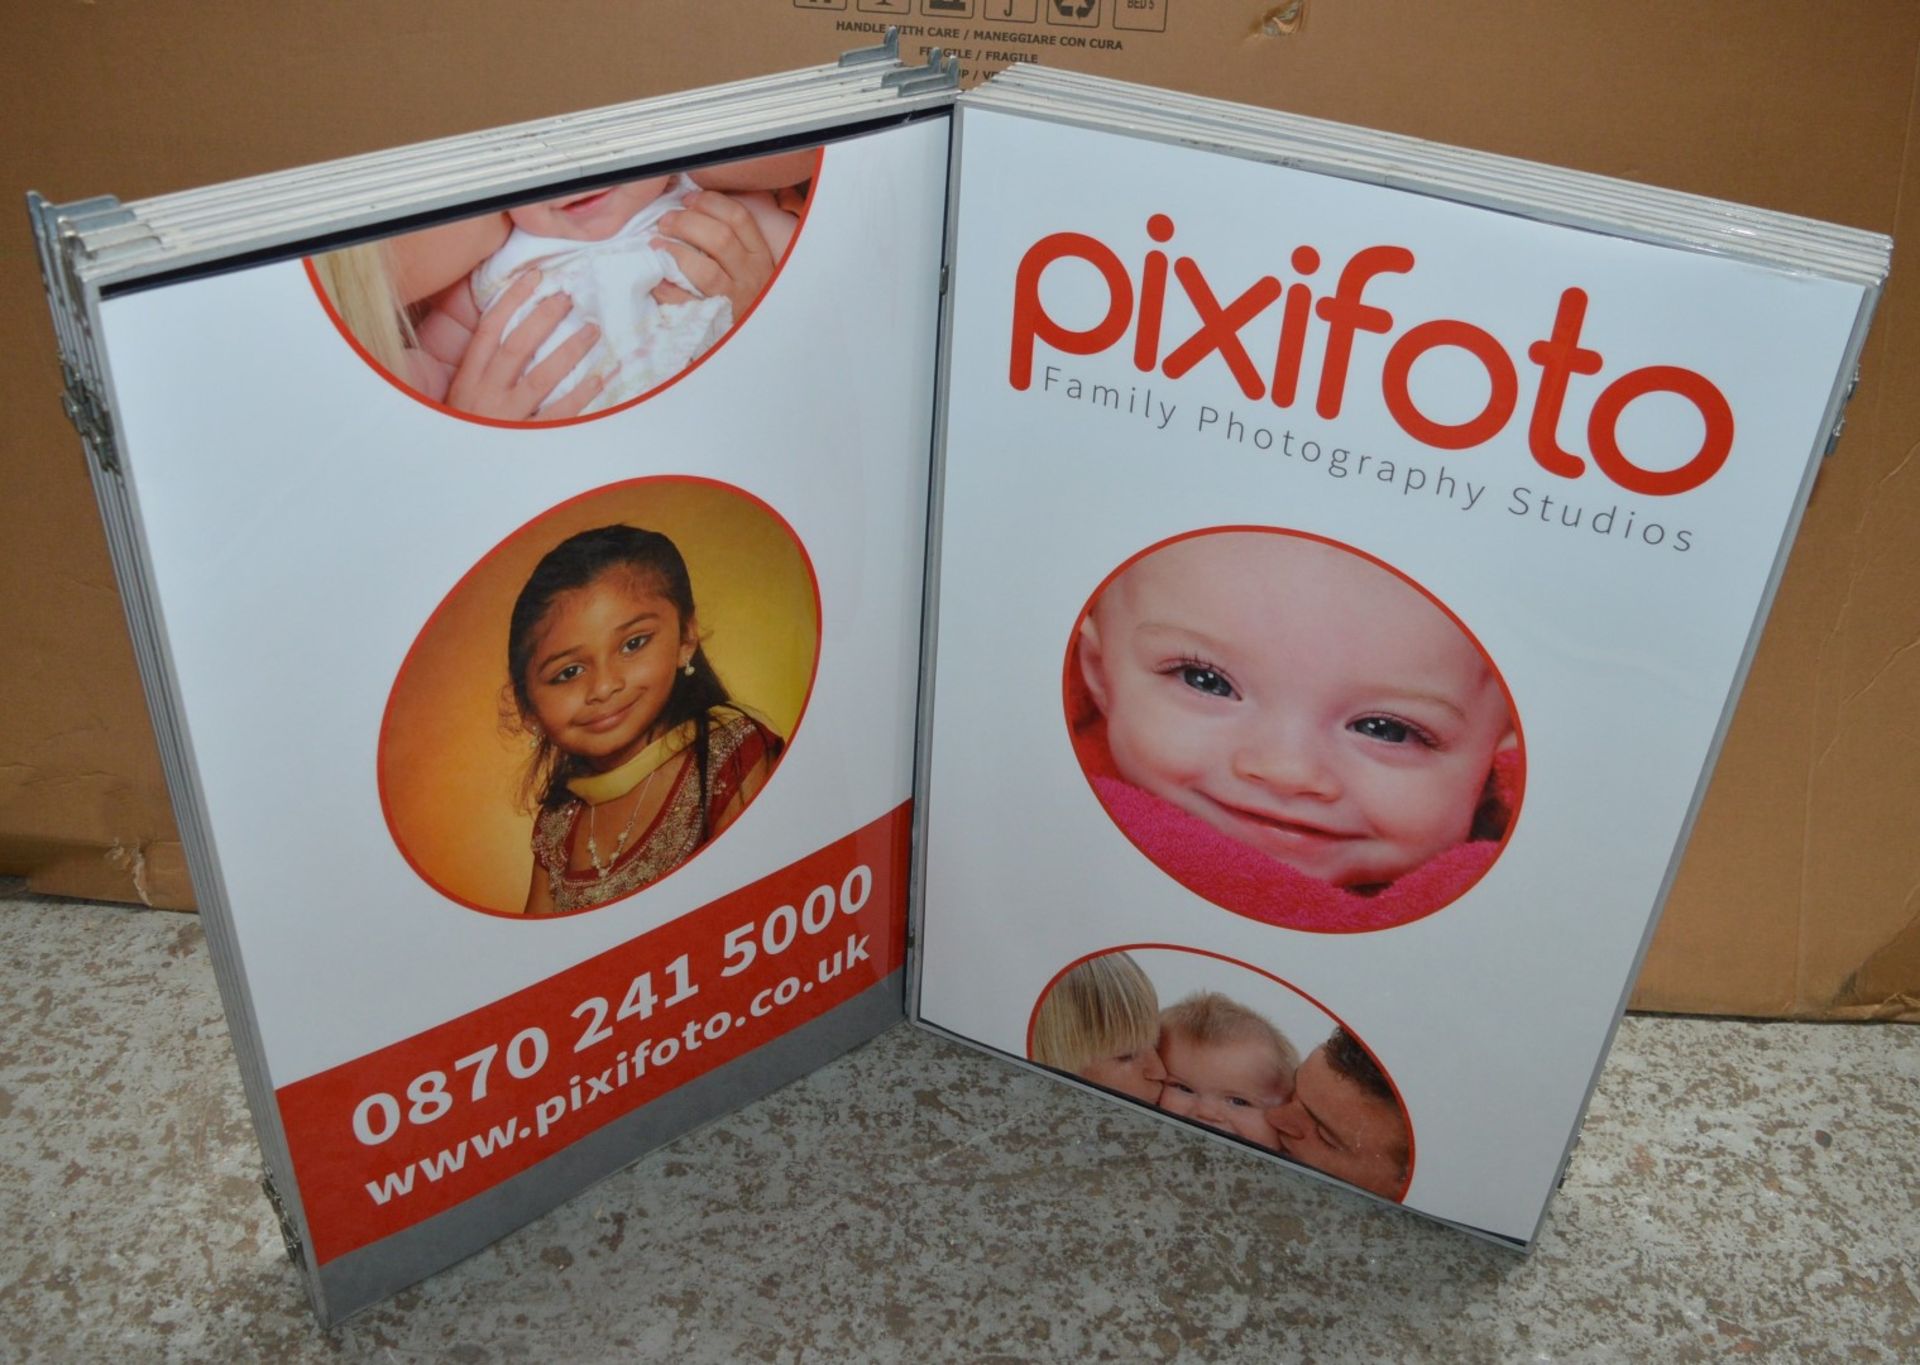 1 x Pixifoto Mobile Flash Photography Booth - Ideal For Use in Shopping Centers, Weddings, - Image 5 of 16